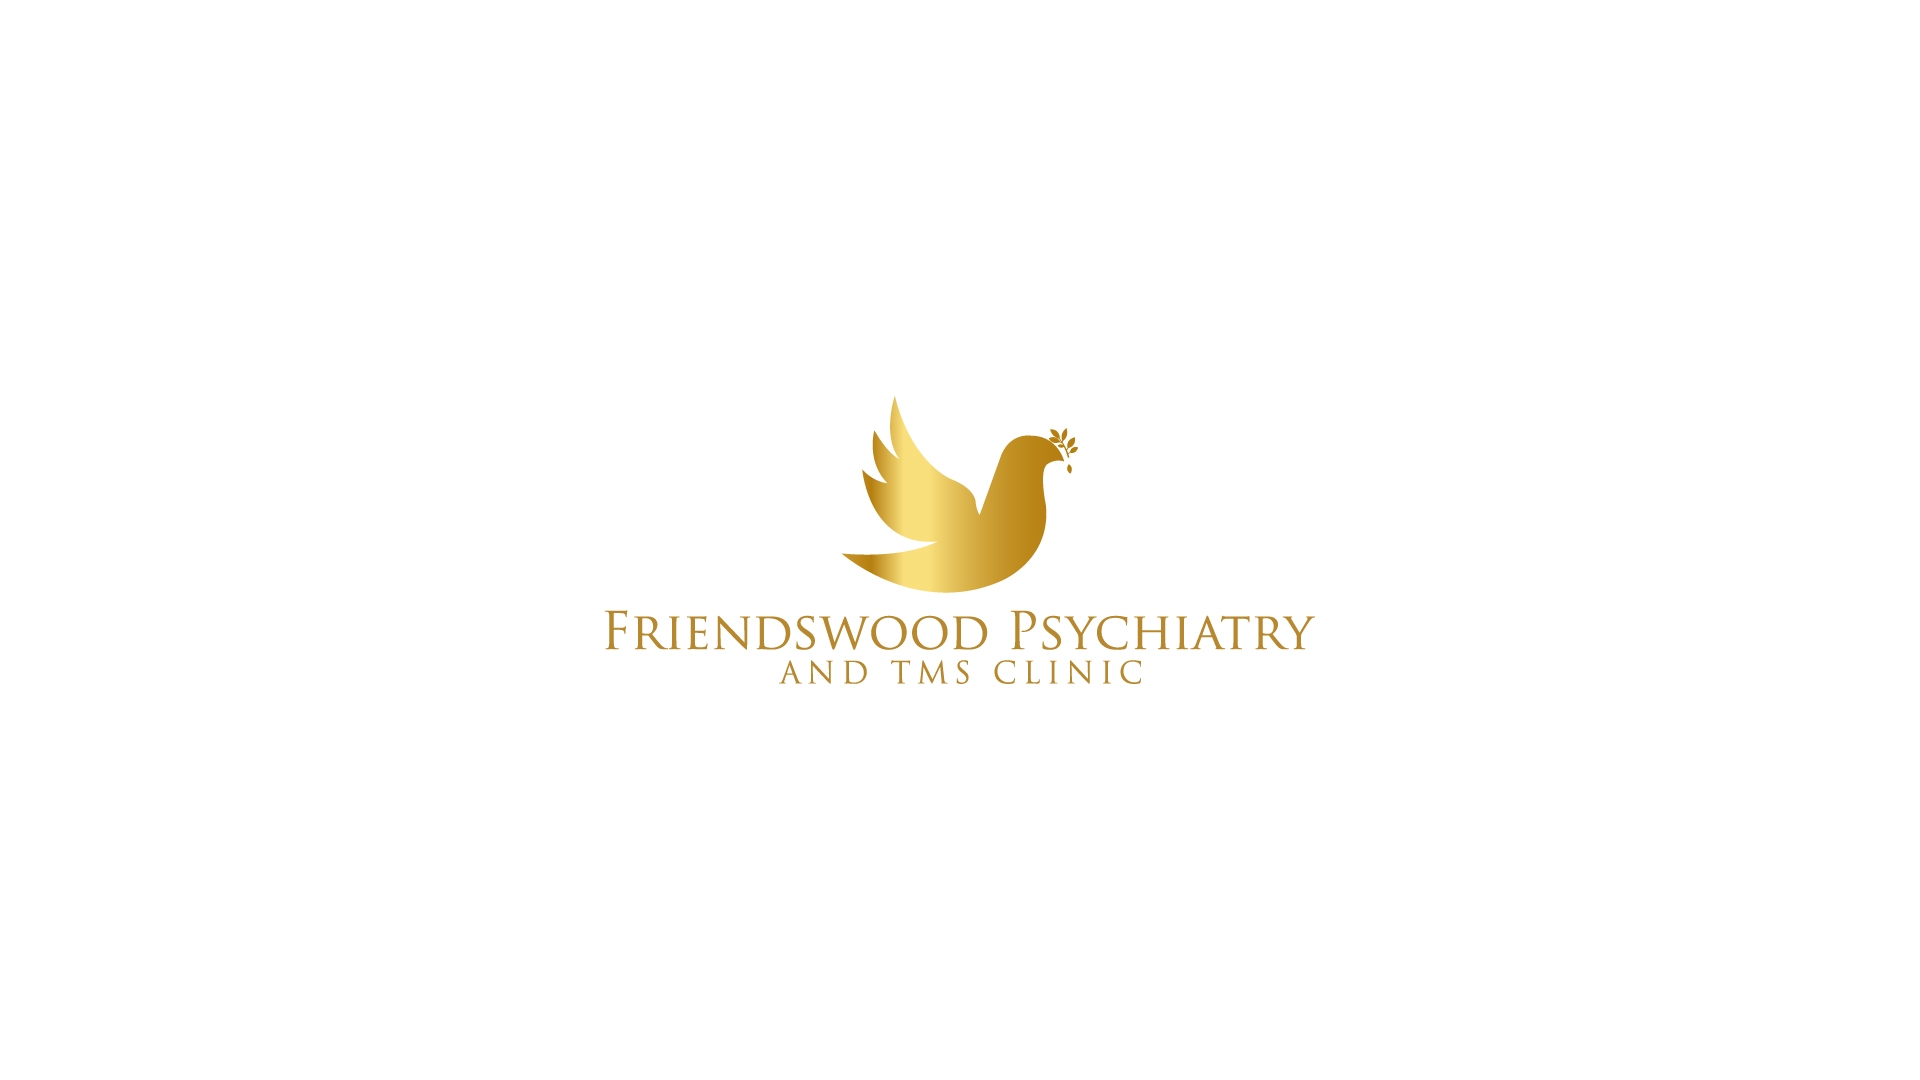 Friendswood Psychiatry and TMS Clinic